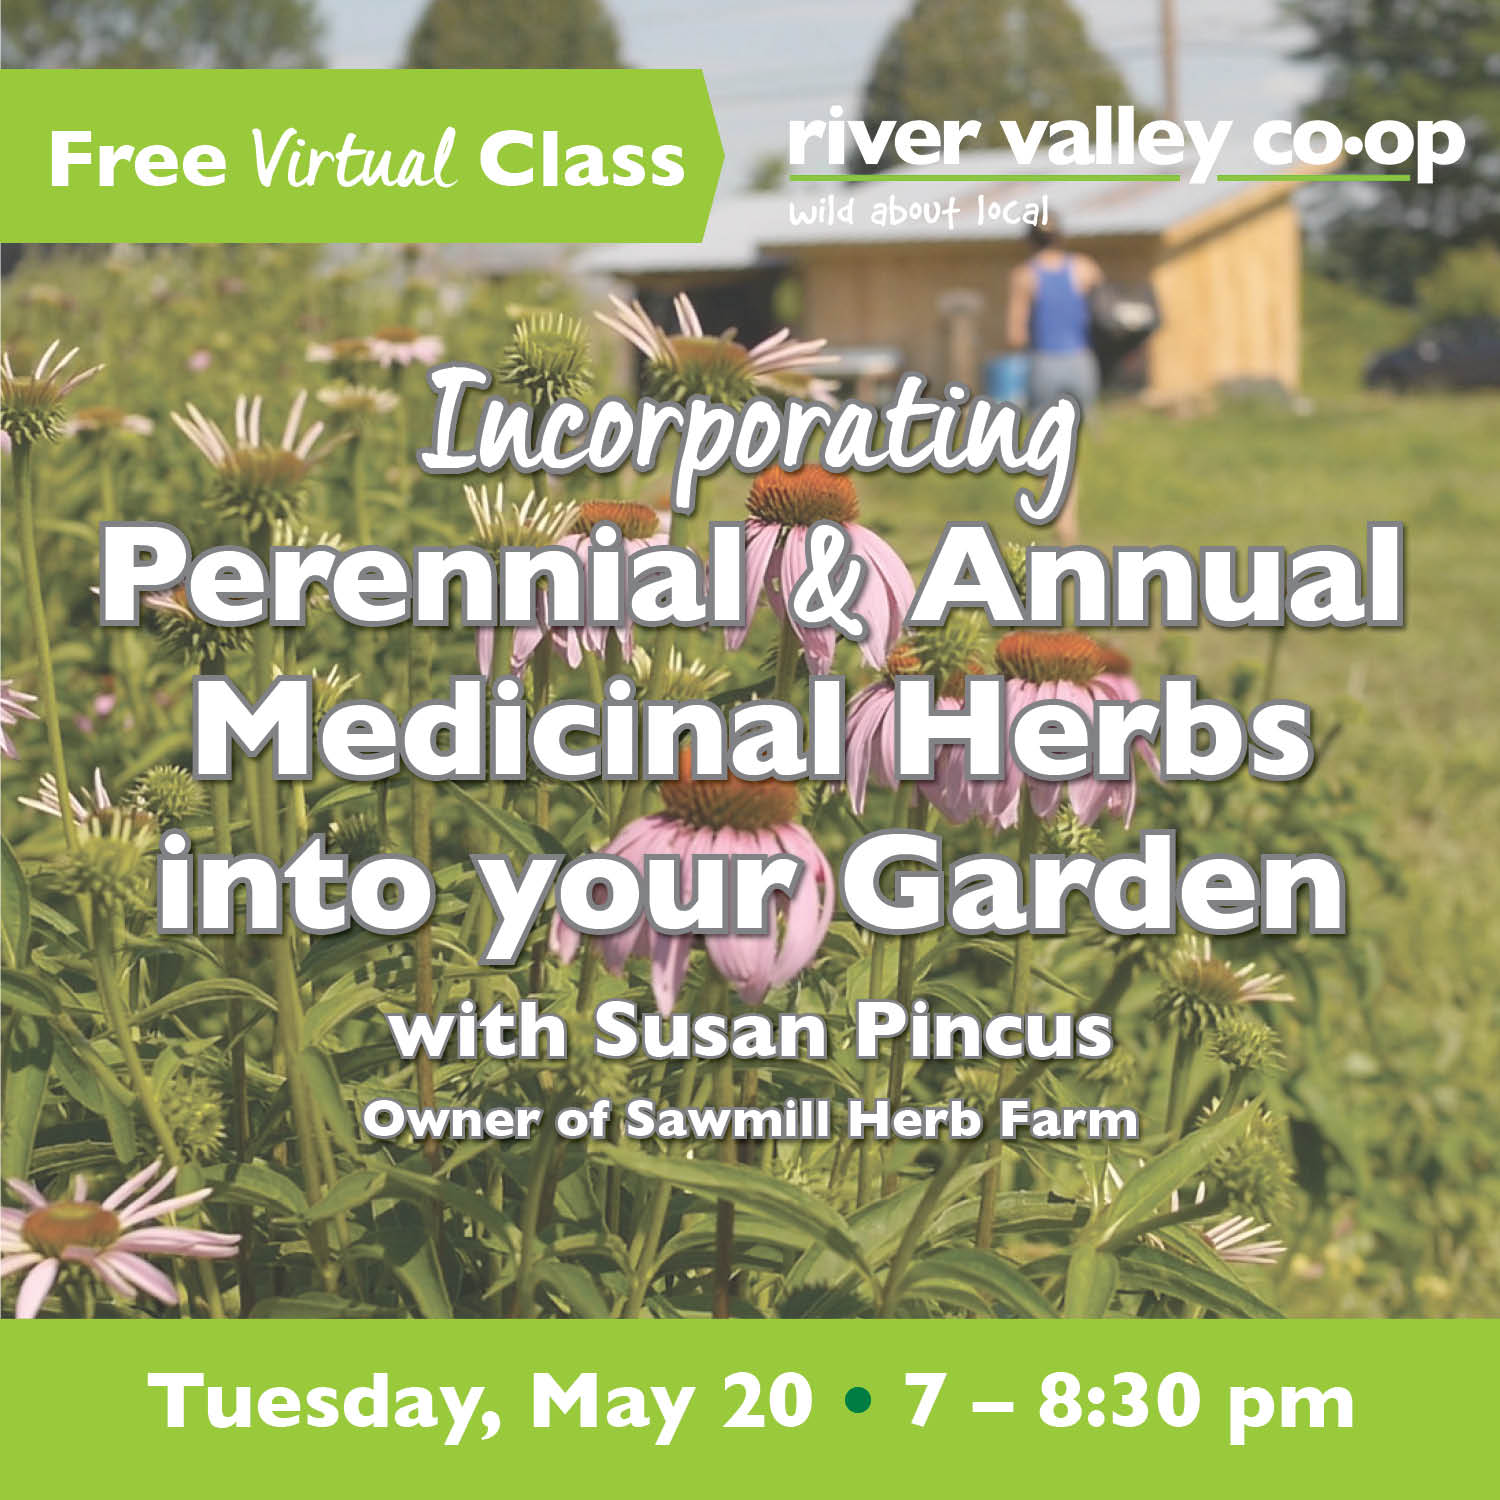 Click to watch "Incorporating Medicinal Herbs Into Your Garden"